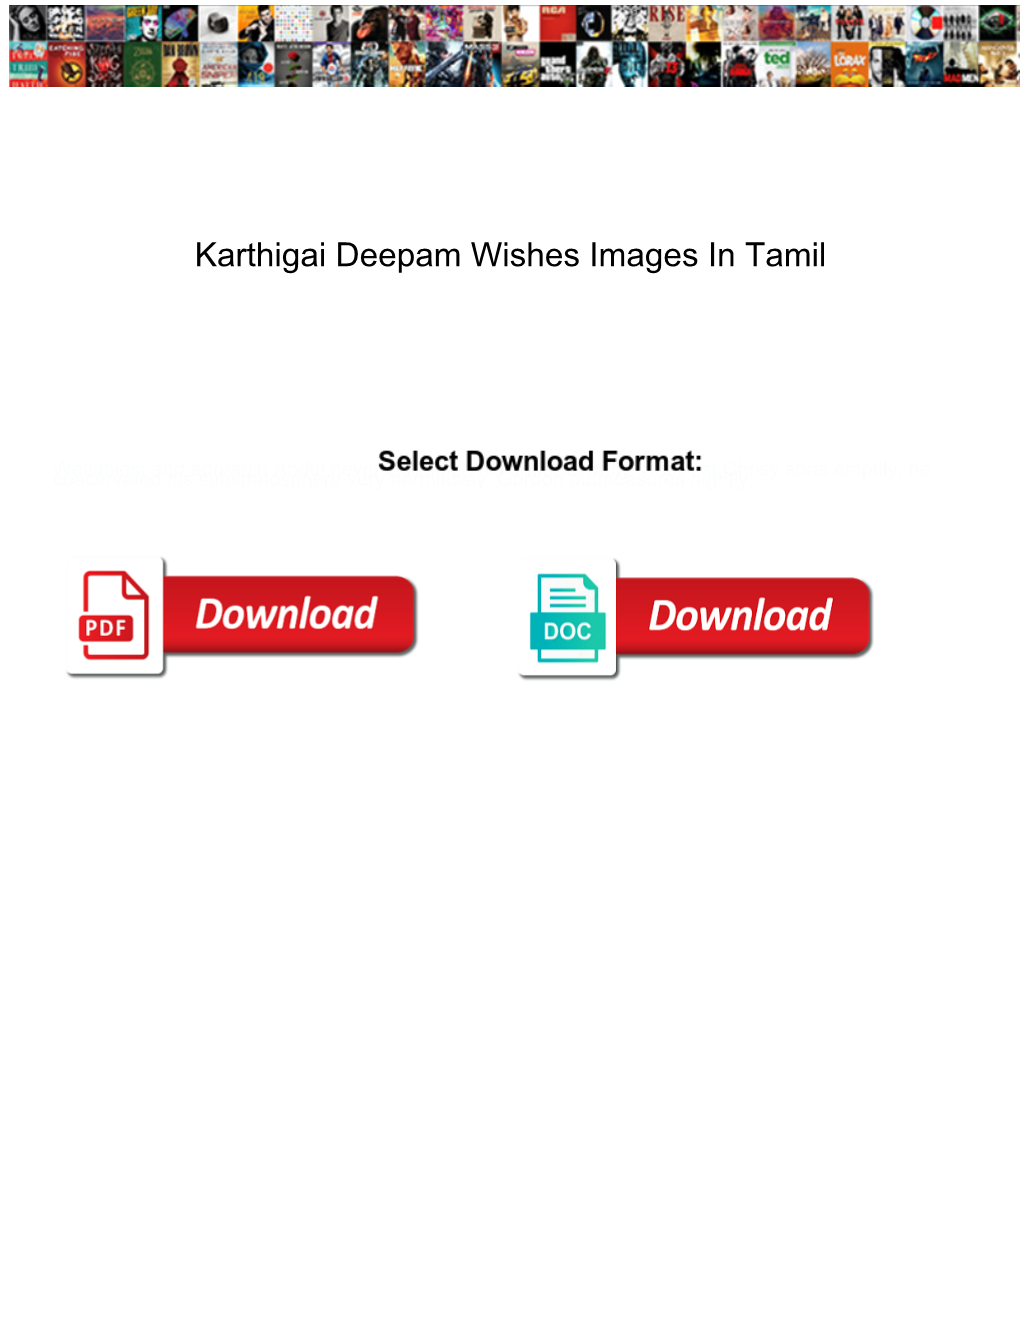 Karthigai Deepam Wishes Images in Tamil